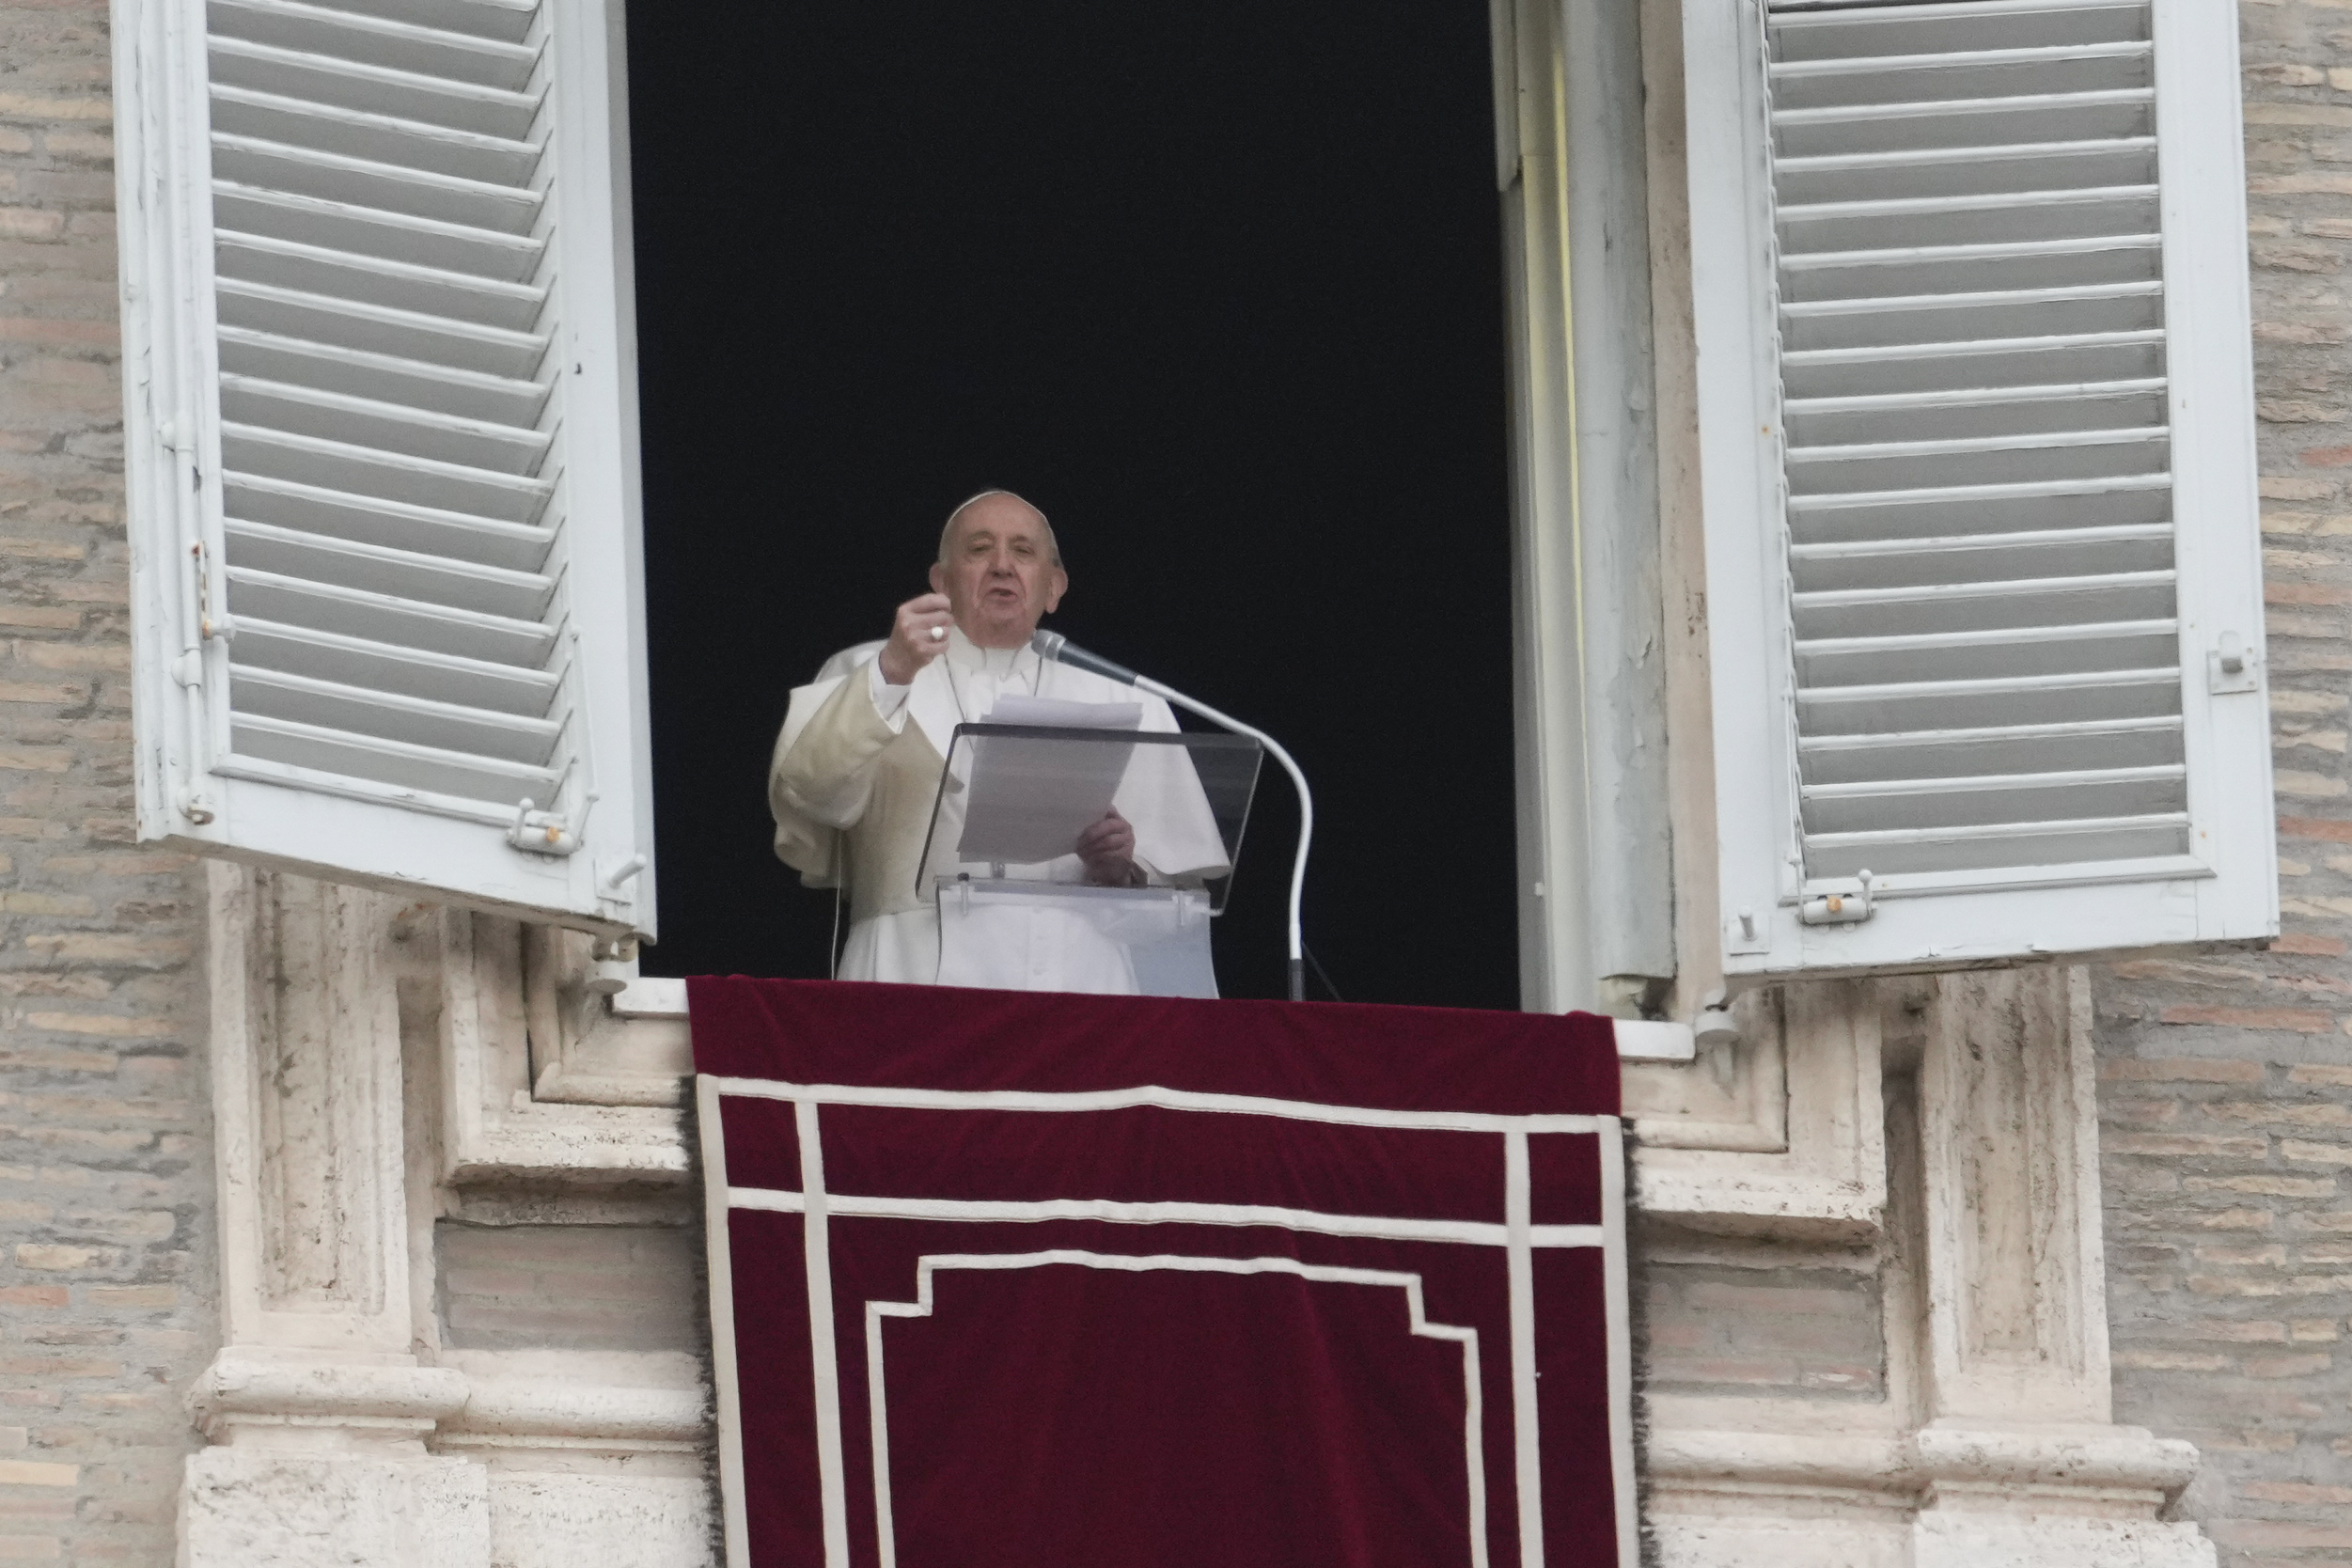 Pope Francis delivers the Angelus noon prayer from his studio window overlooking St. Peter's Square, at the Vatican, Sunday, Feb. 20, 2022. (AP Photo/Gregorio Borgia)